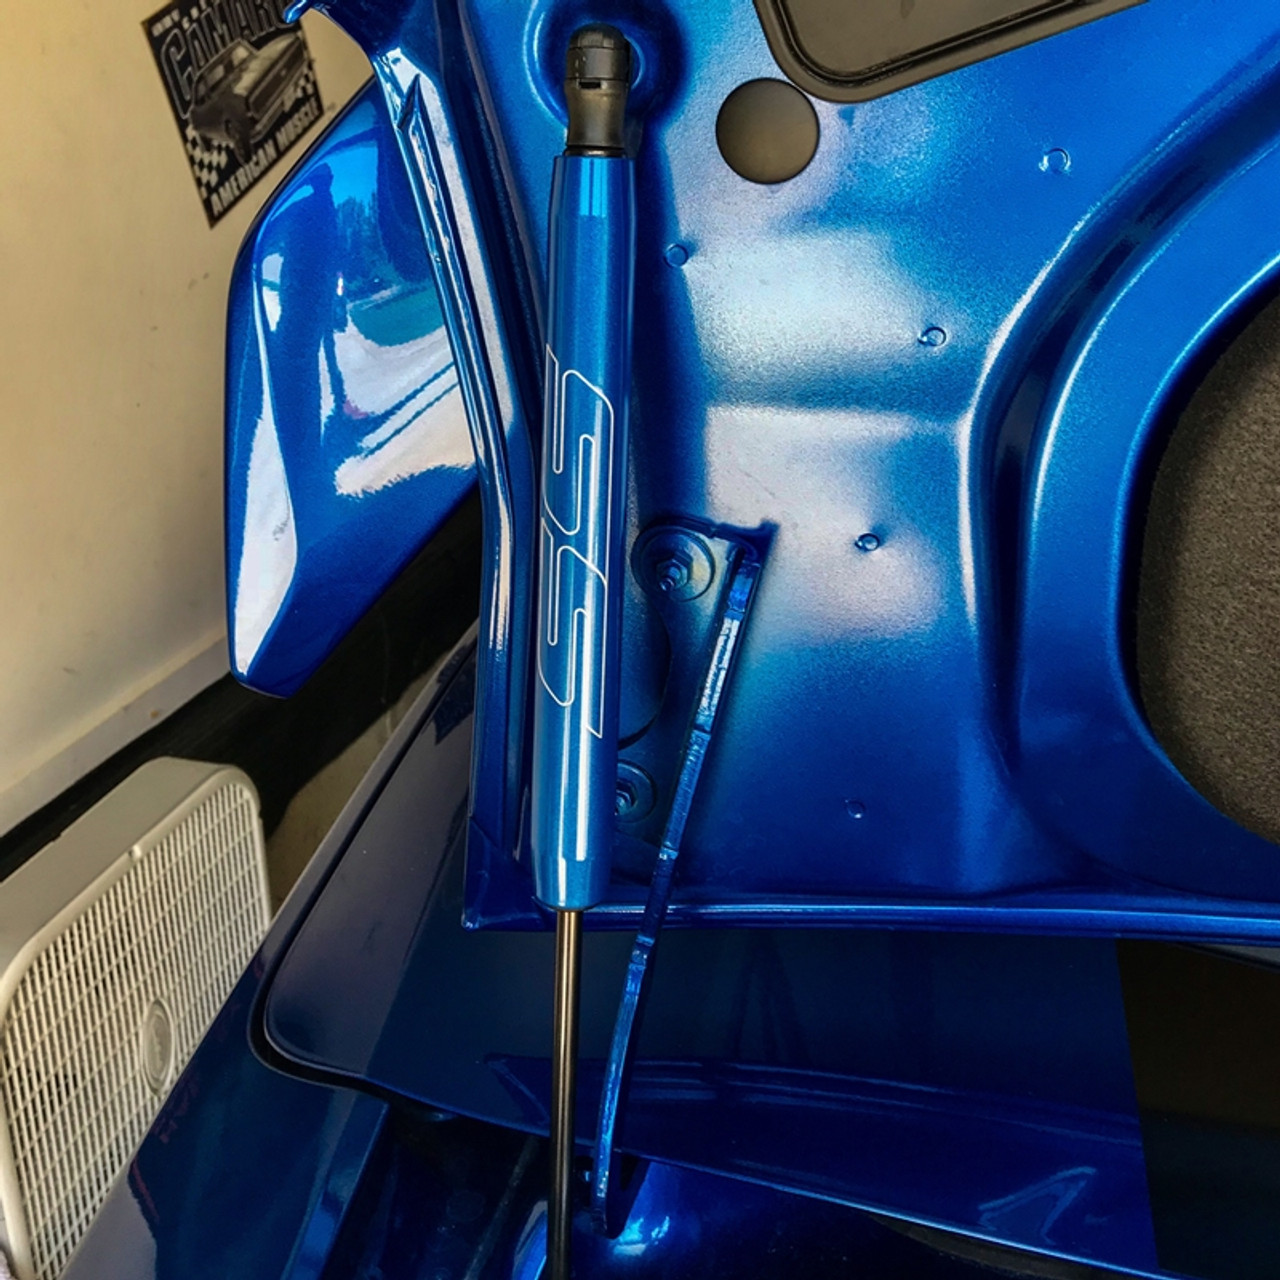 Camaro 2016-Up Color Match Billet Trunk Shock Covers - on car (SS logo shown)